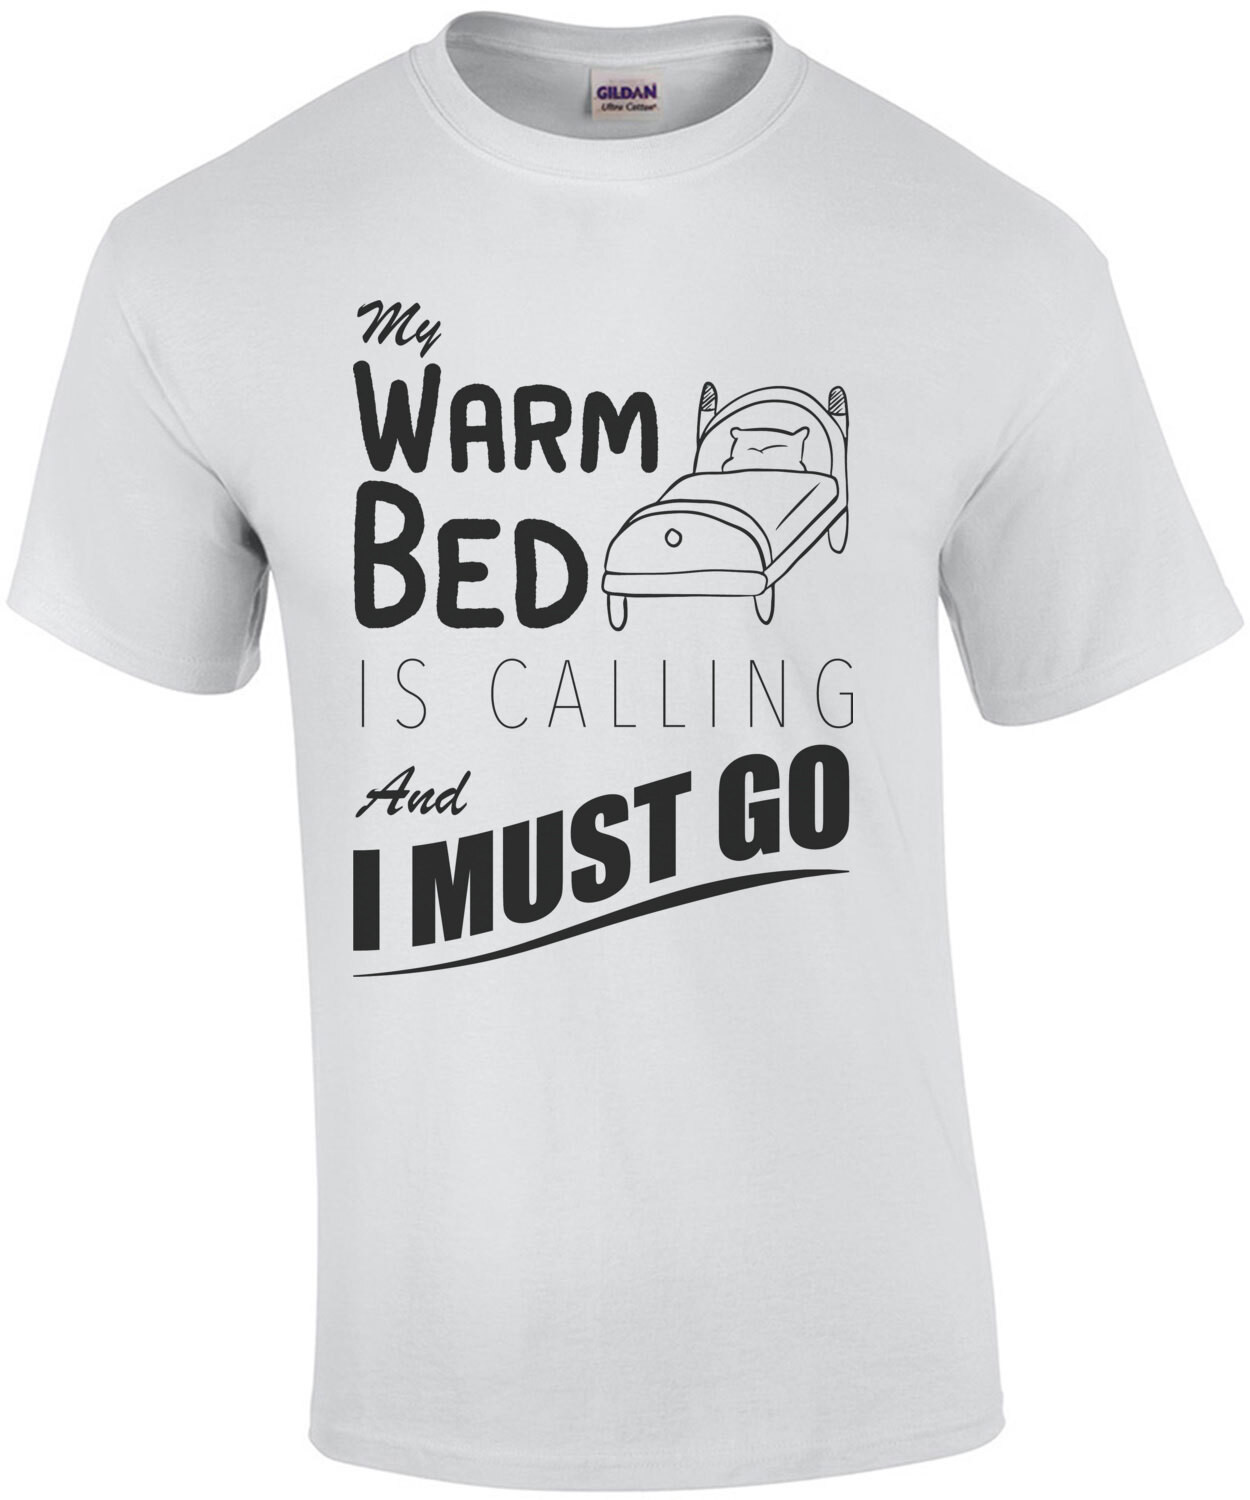 My warm bed is calling and I must go - funny t-shirt